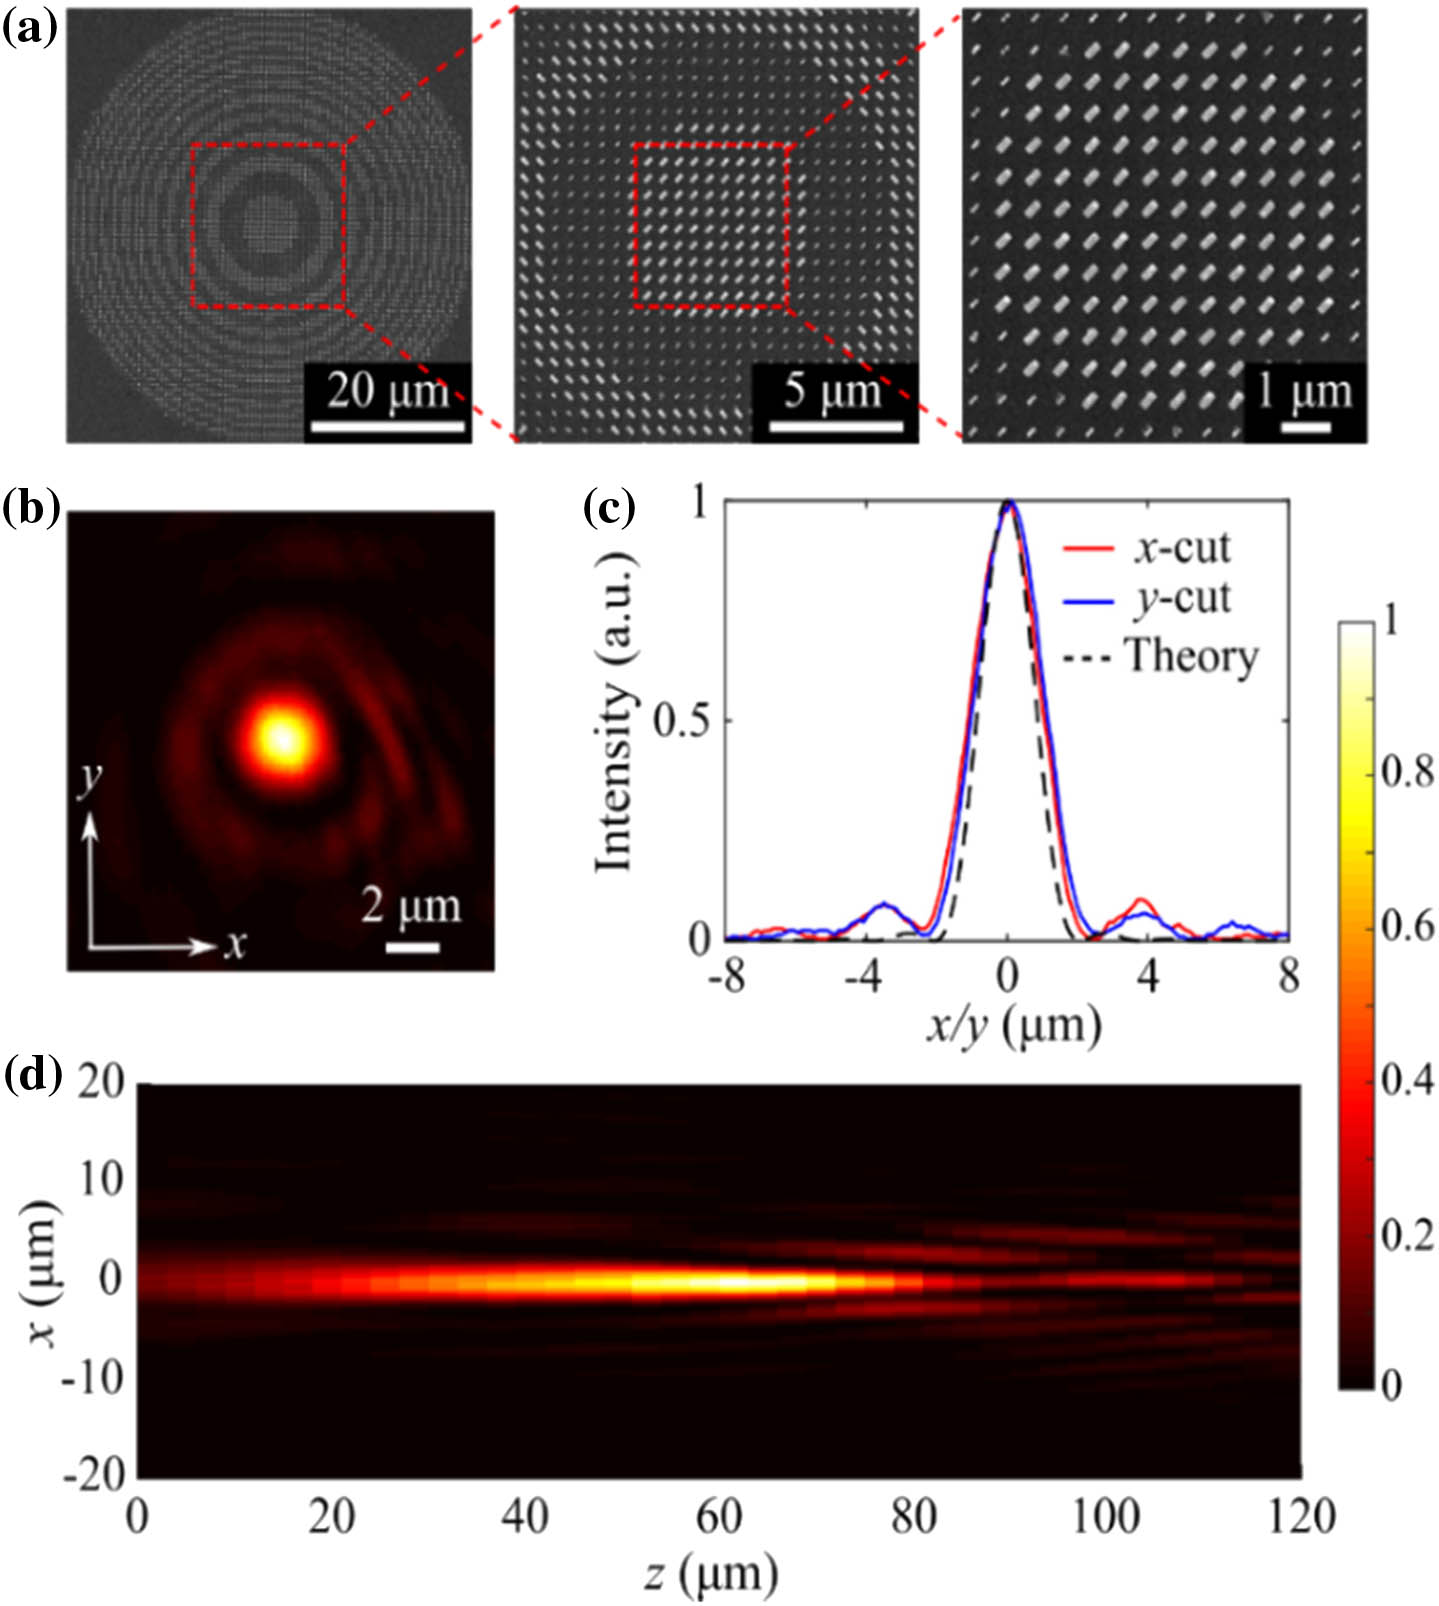 Experimental demonstration of the GSP single-focal metalens for linear-polarization conversion and focusing. (a) Top-view SEM images of the fabricated sample with different magnifications. (b) Measured focal spot profiles in cross-polarization. (c) Measured intensity distributions in cross-polarization along the horizontal (x) and vertical (y) line cutting through the center of the focal spot in comparison with diffraction-limited focal spot profile. (d) Measured intensity profiles of the reflected beam in the x-z plane in cross-polarization. The x-polarized Gaussian beam is normally incident on the central part of the sample at the design wavelength of λ=850 nm.